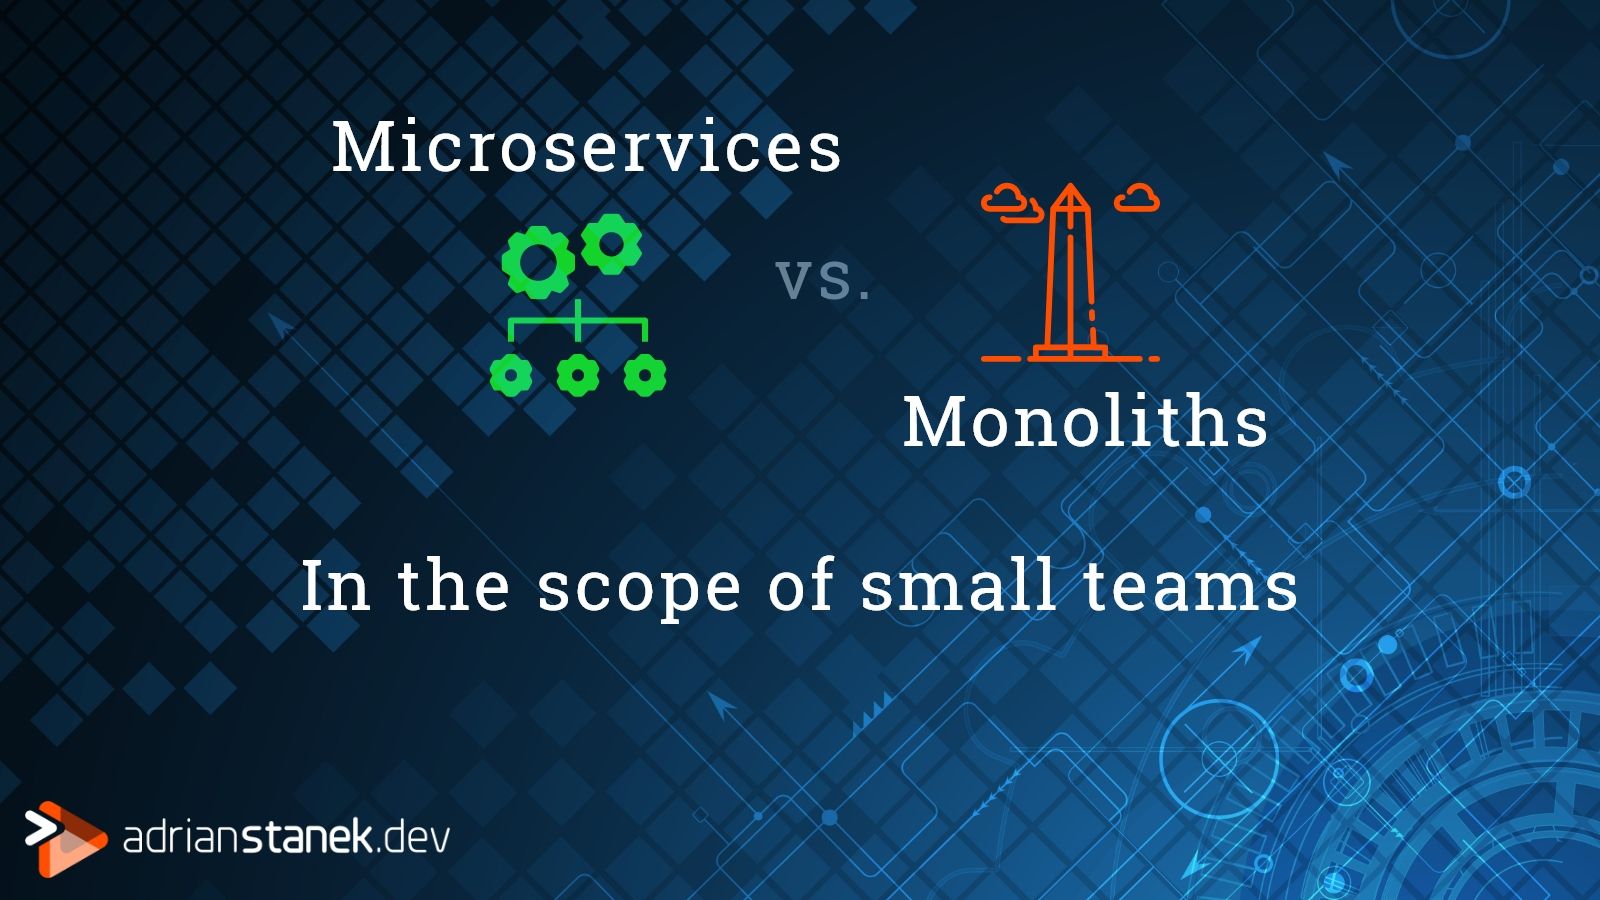 Microservices vs. Monoliths – In the scope of small teams